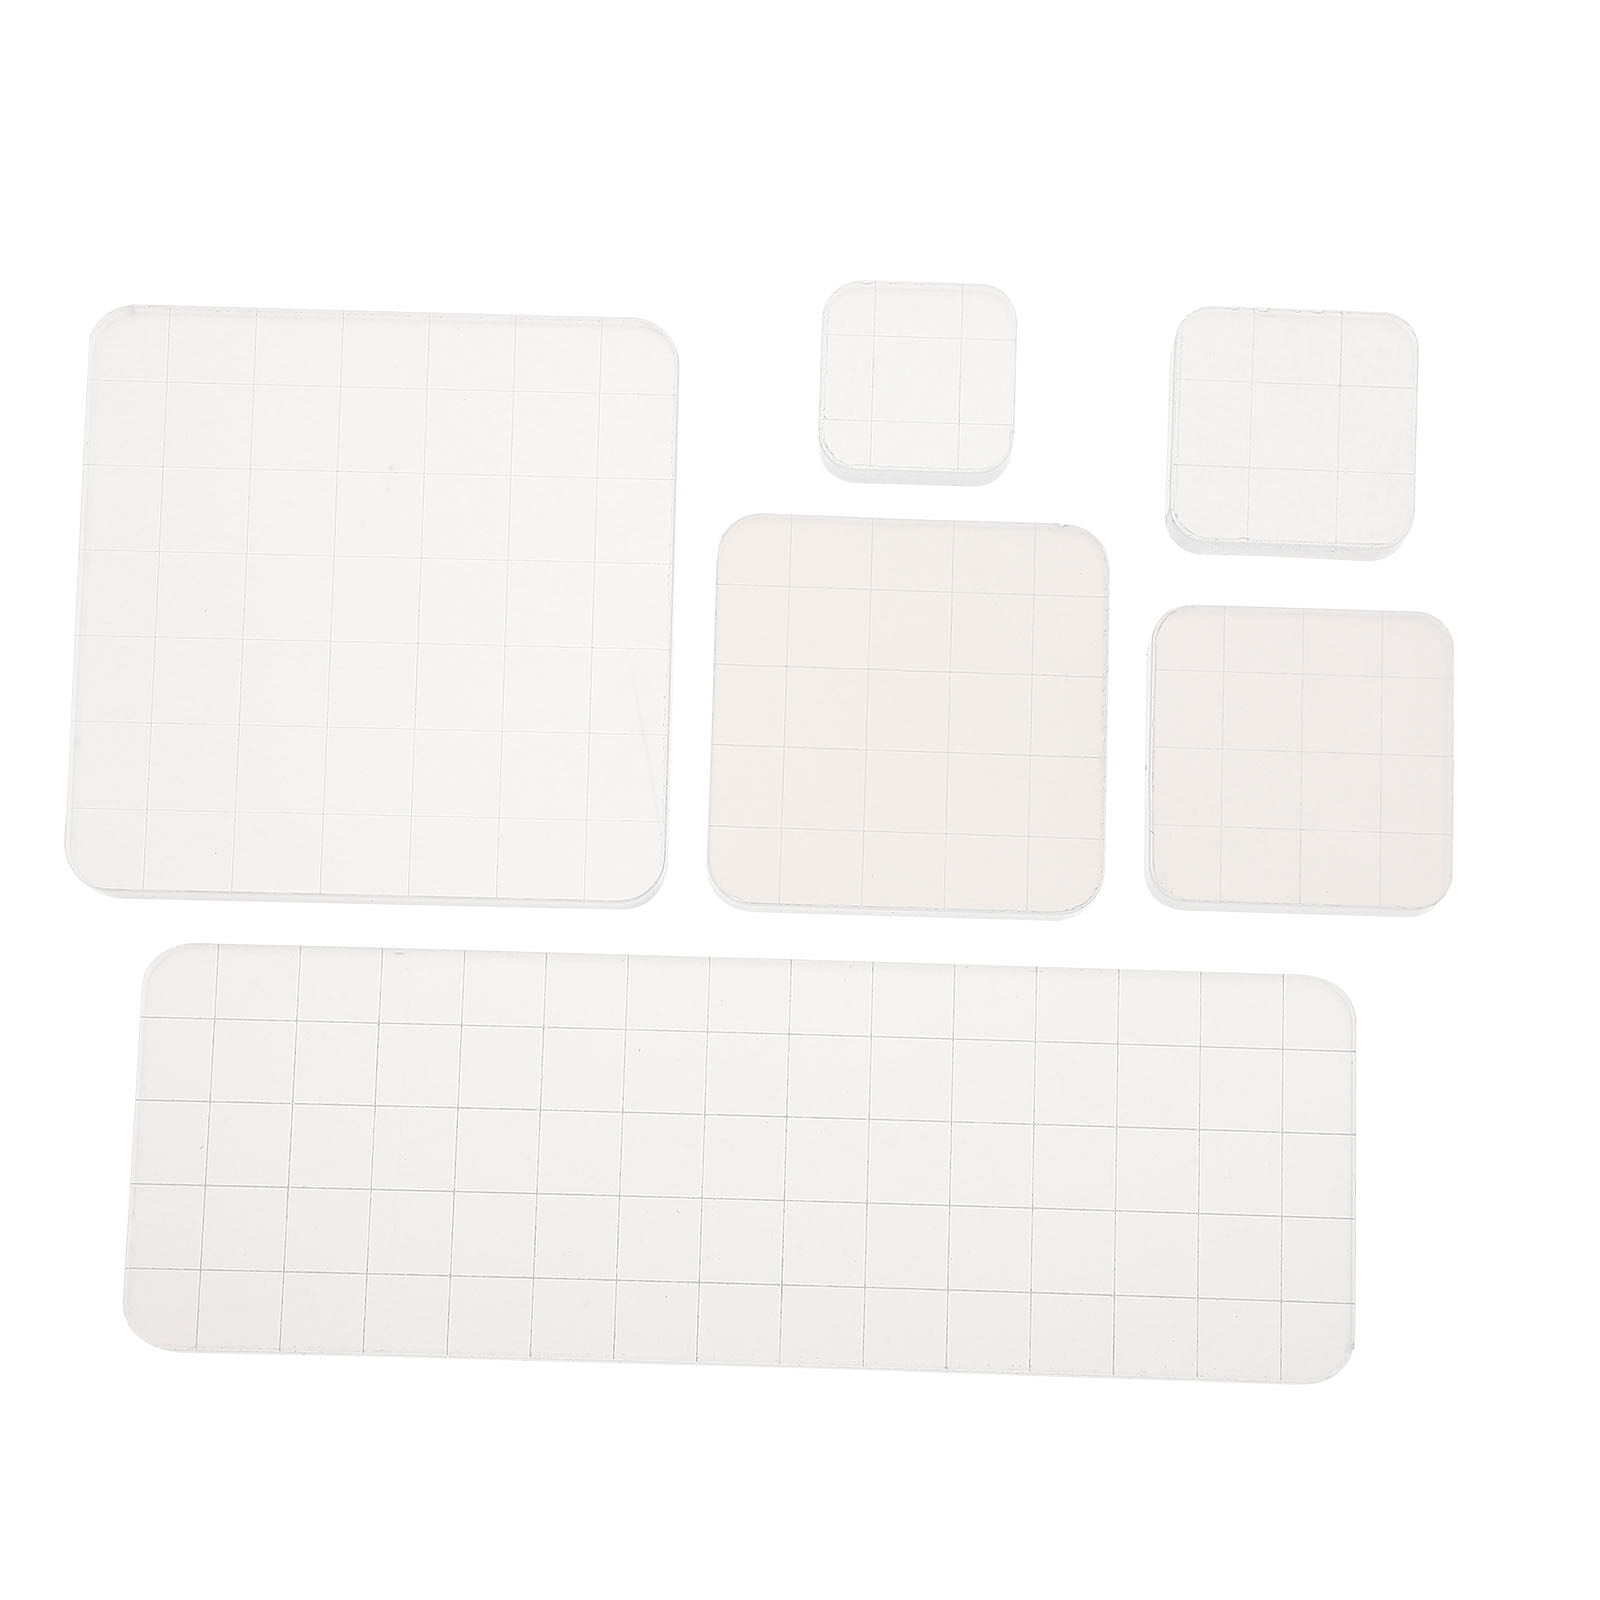 Acrylic Stamp Block Set for Crafts, 5 Sizes (Clear, 5 Pack) 